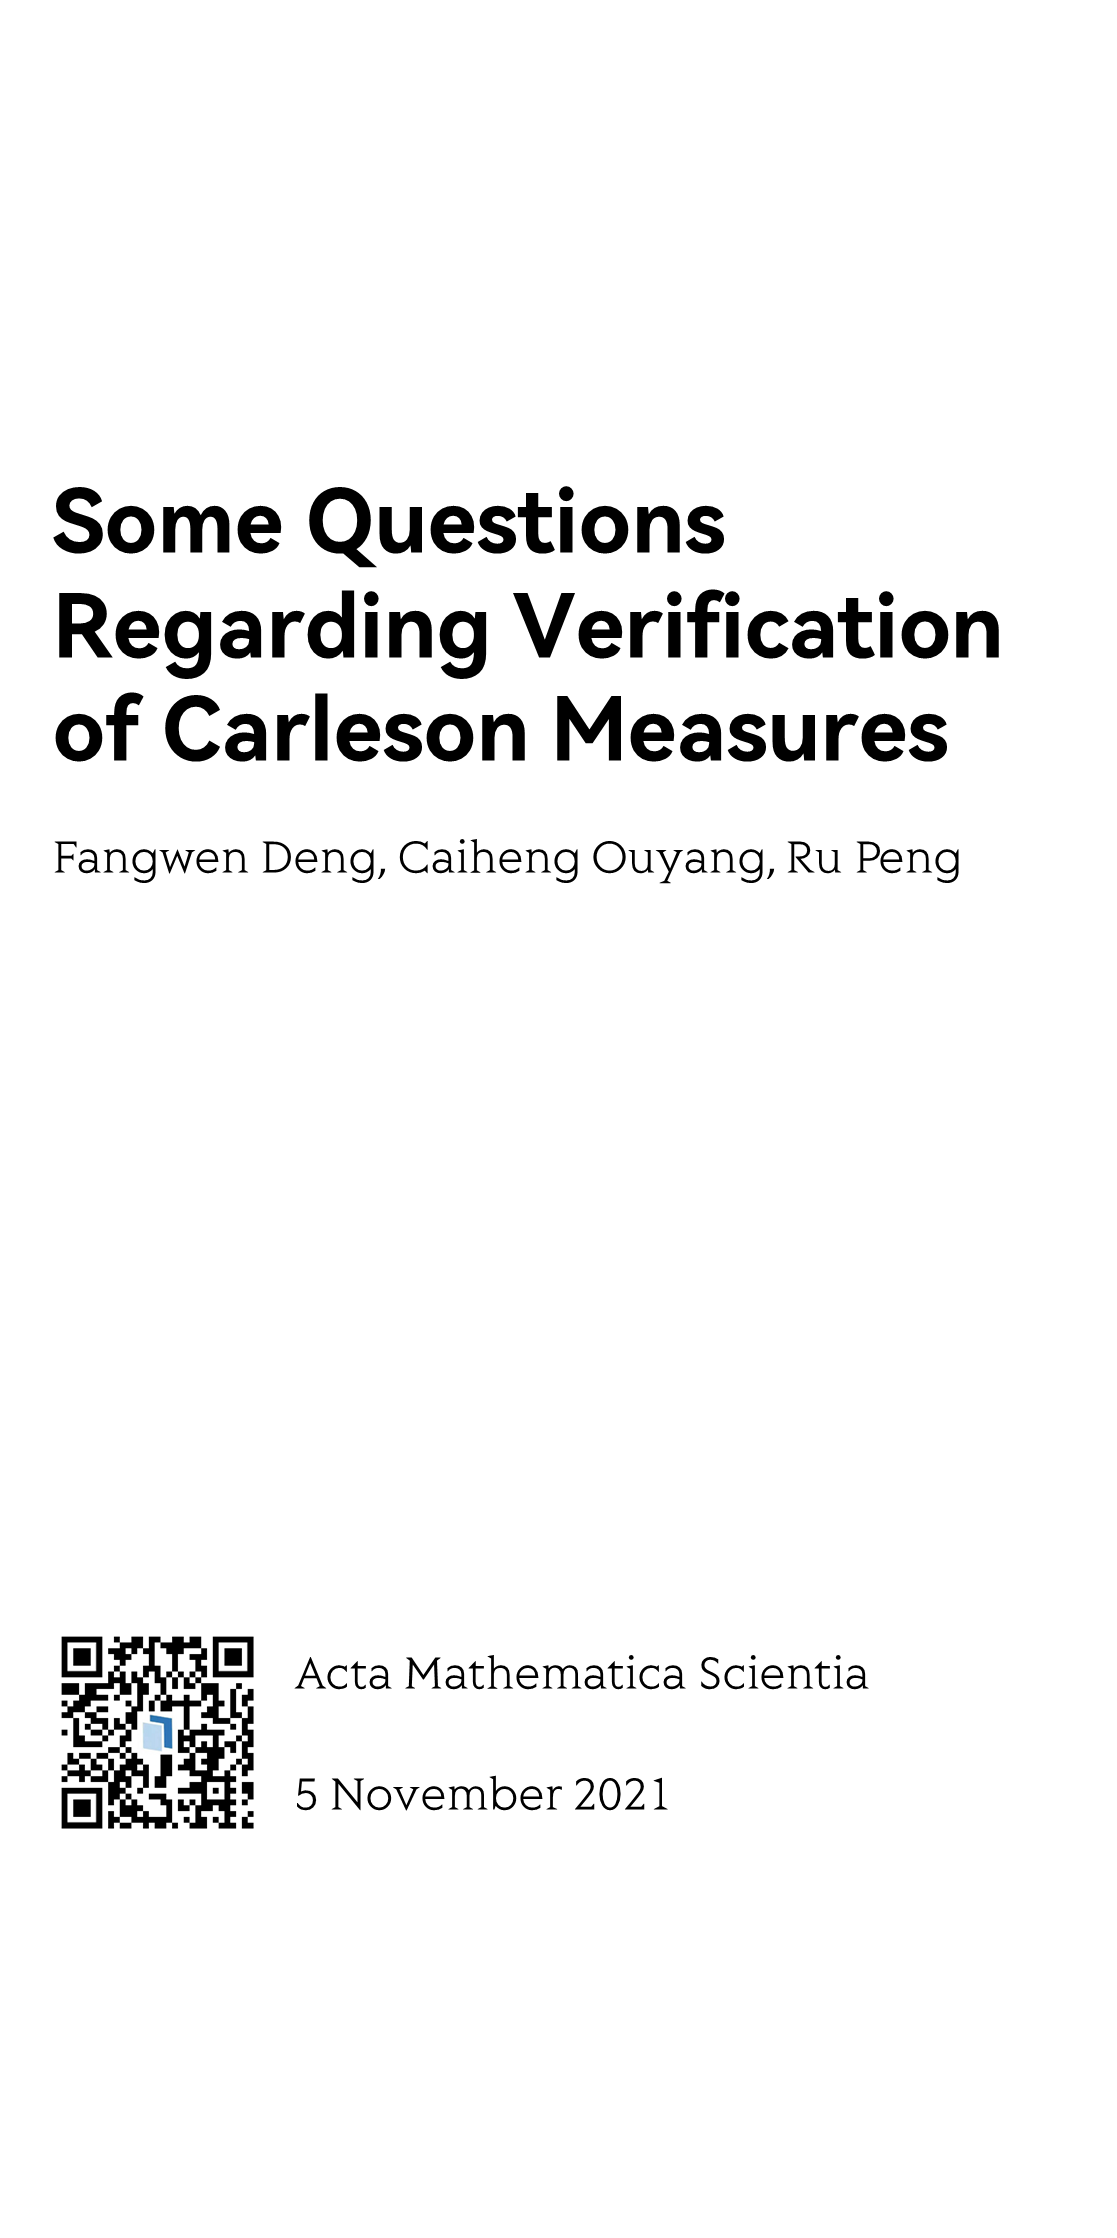 Some Questions Regarding Verification of Carleson Measures_1